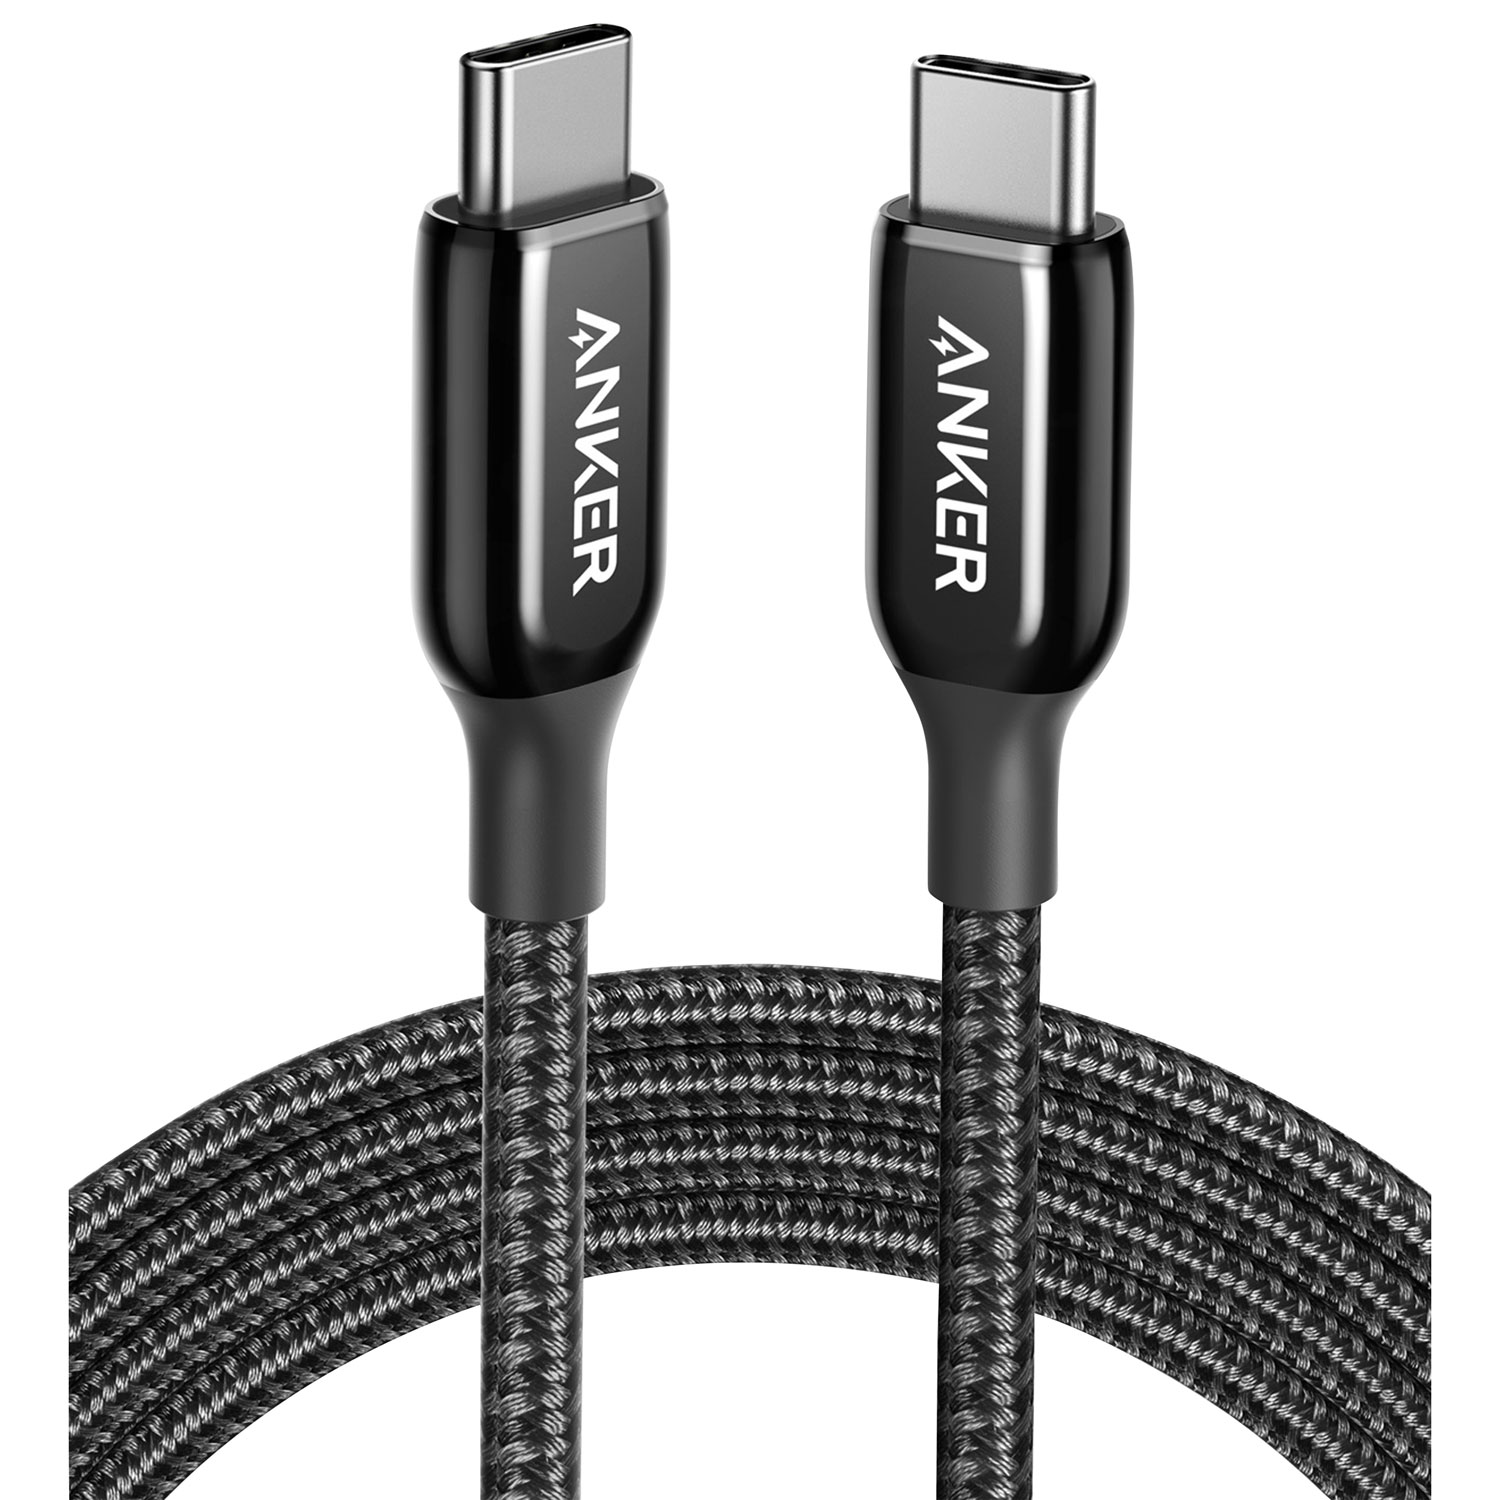 Anker PowerLine+ III 1.8m (6 ft.) USB-C/USB 2.0 Cable (A8863H11-5)